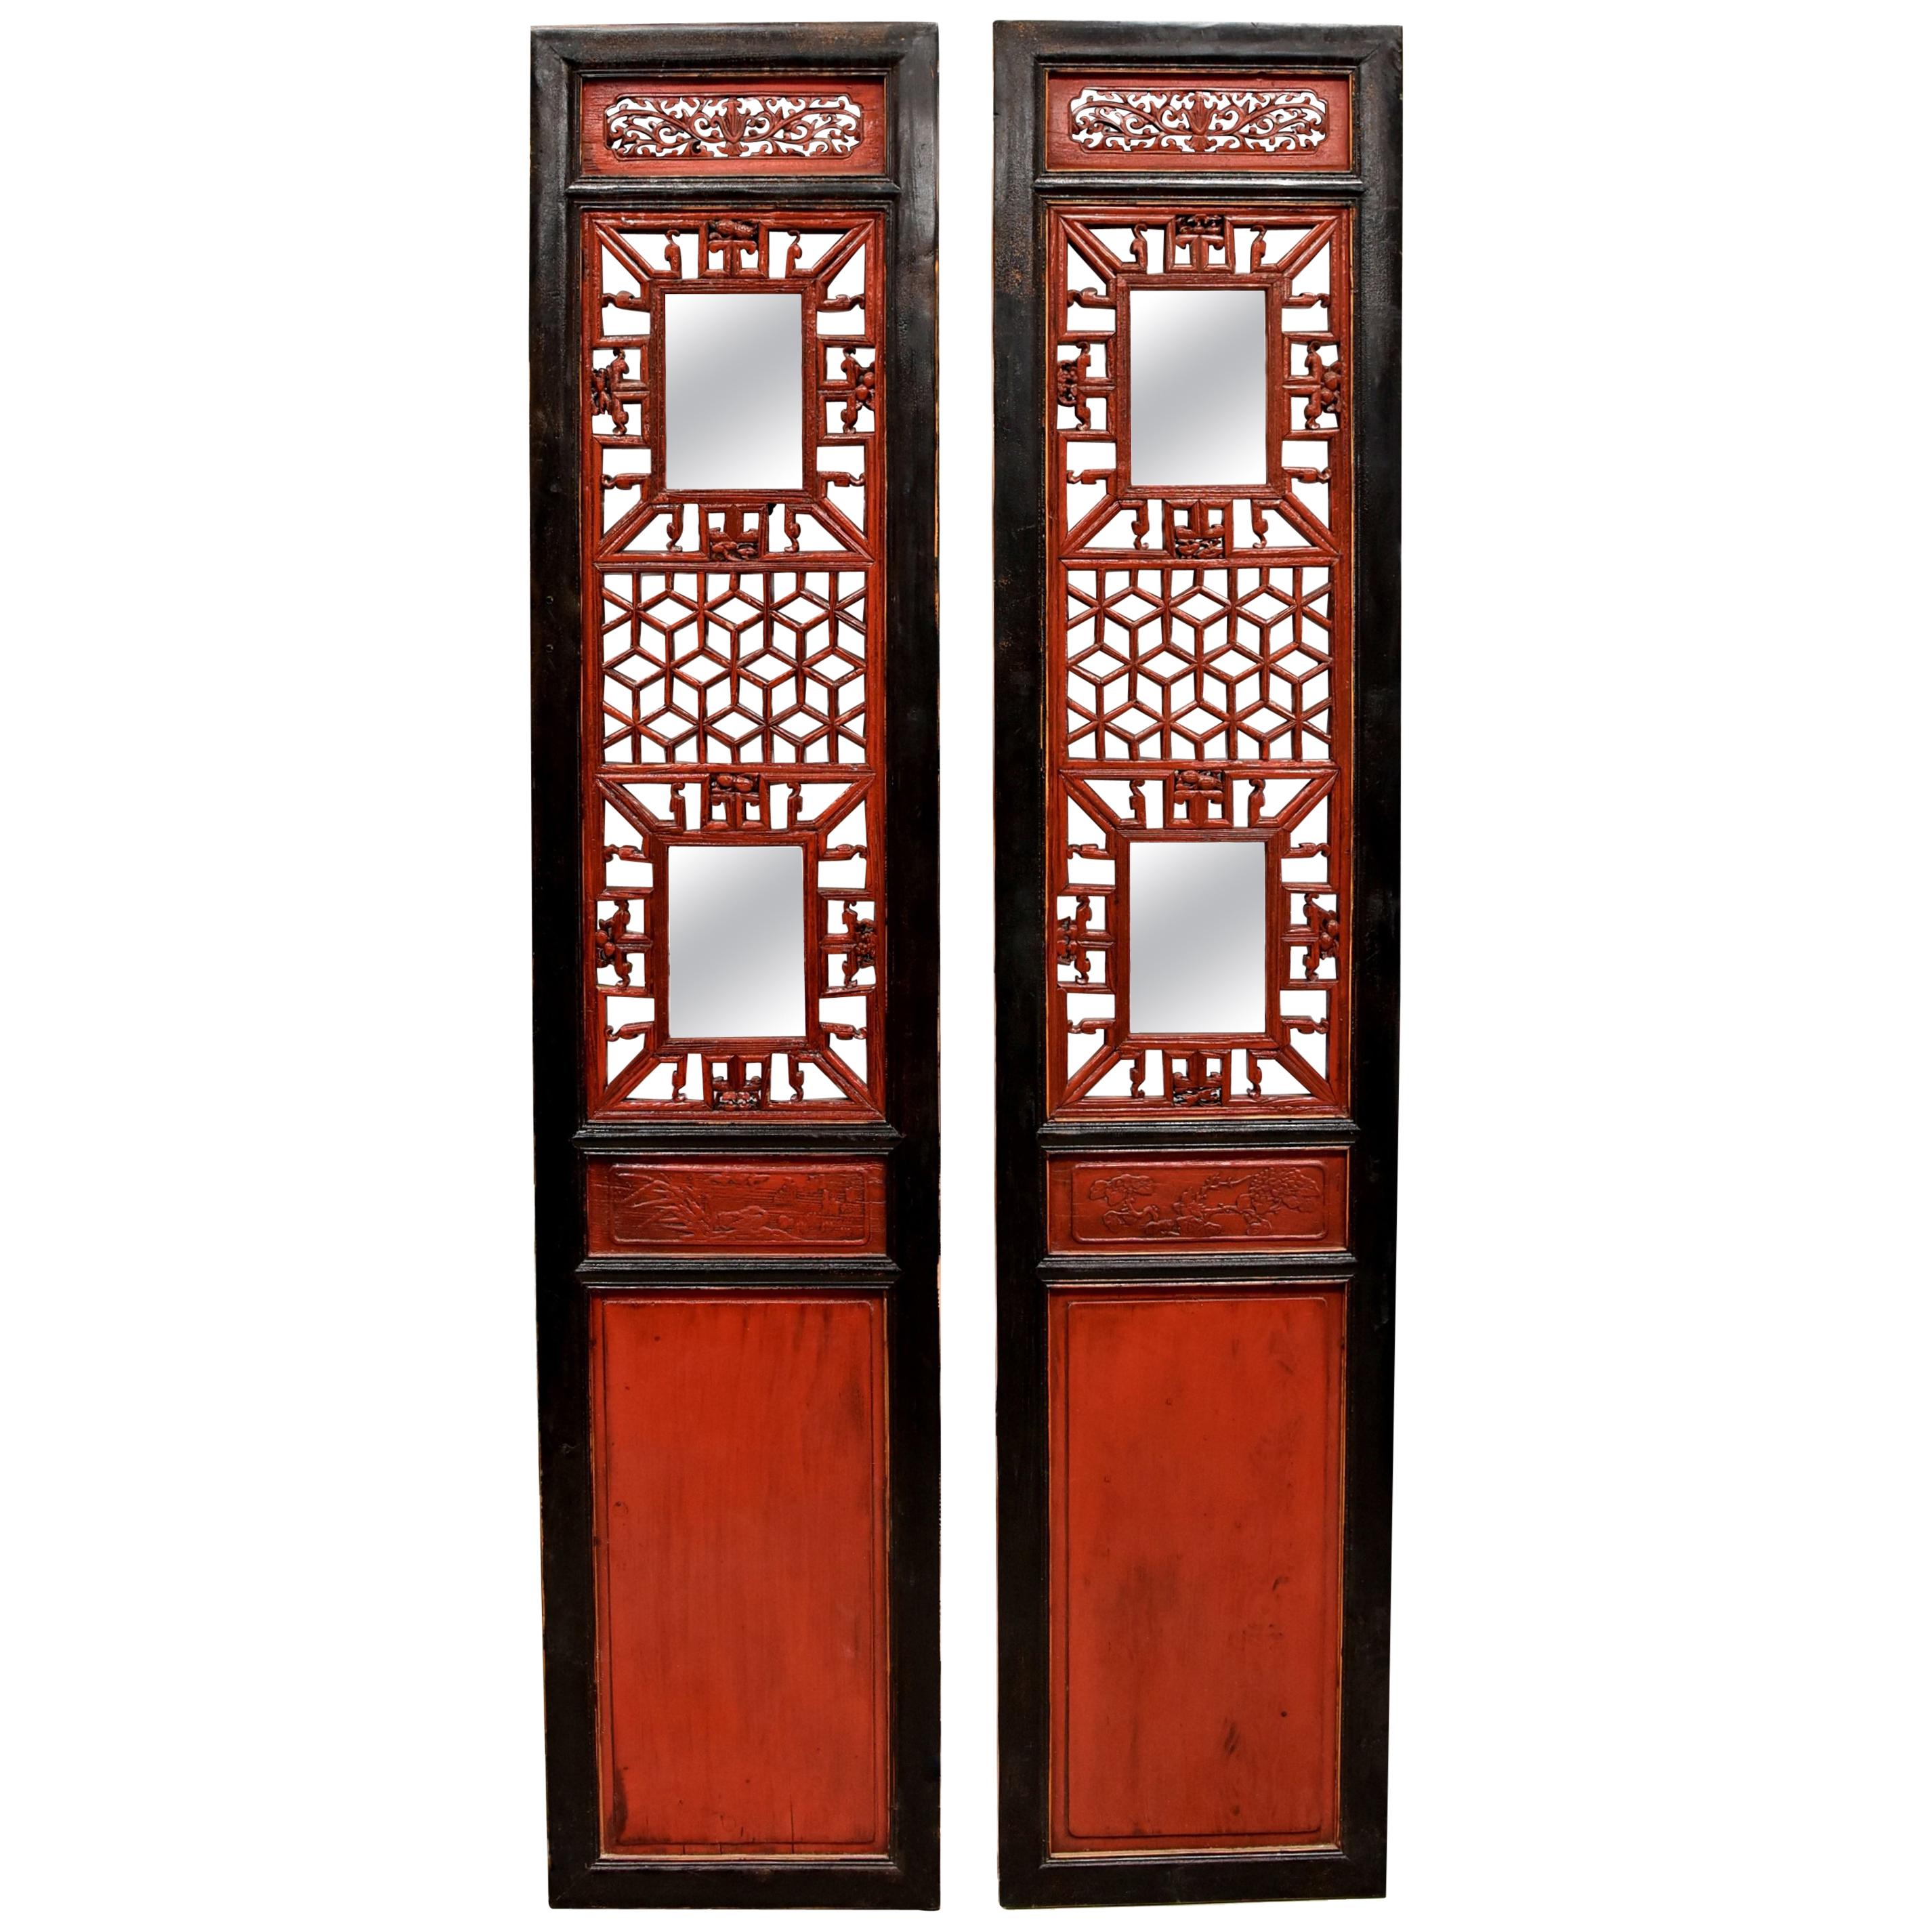 Pair of Antique Red and Black Chinese Screens